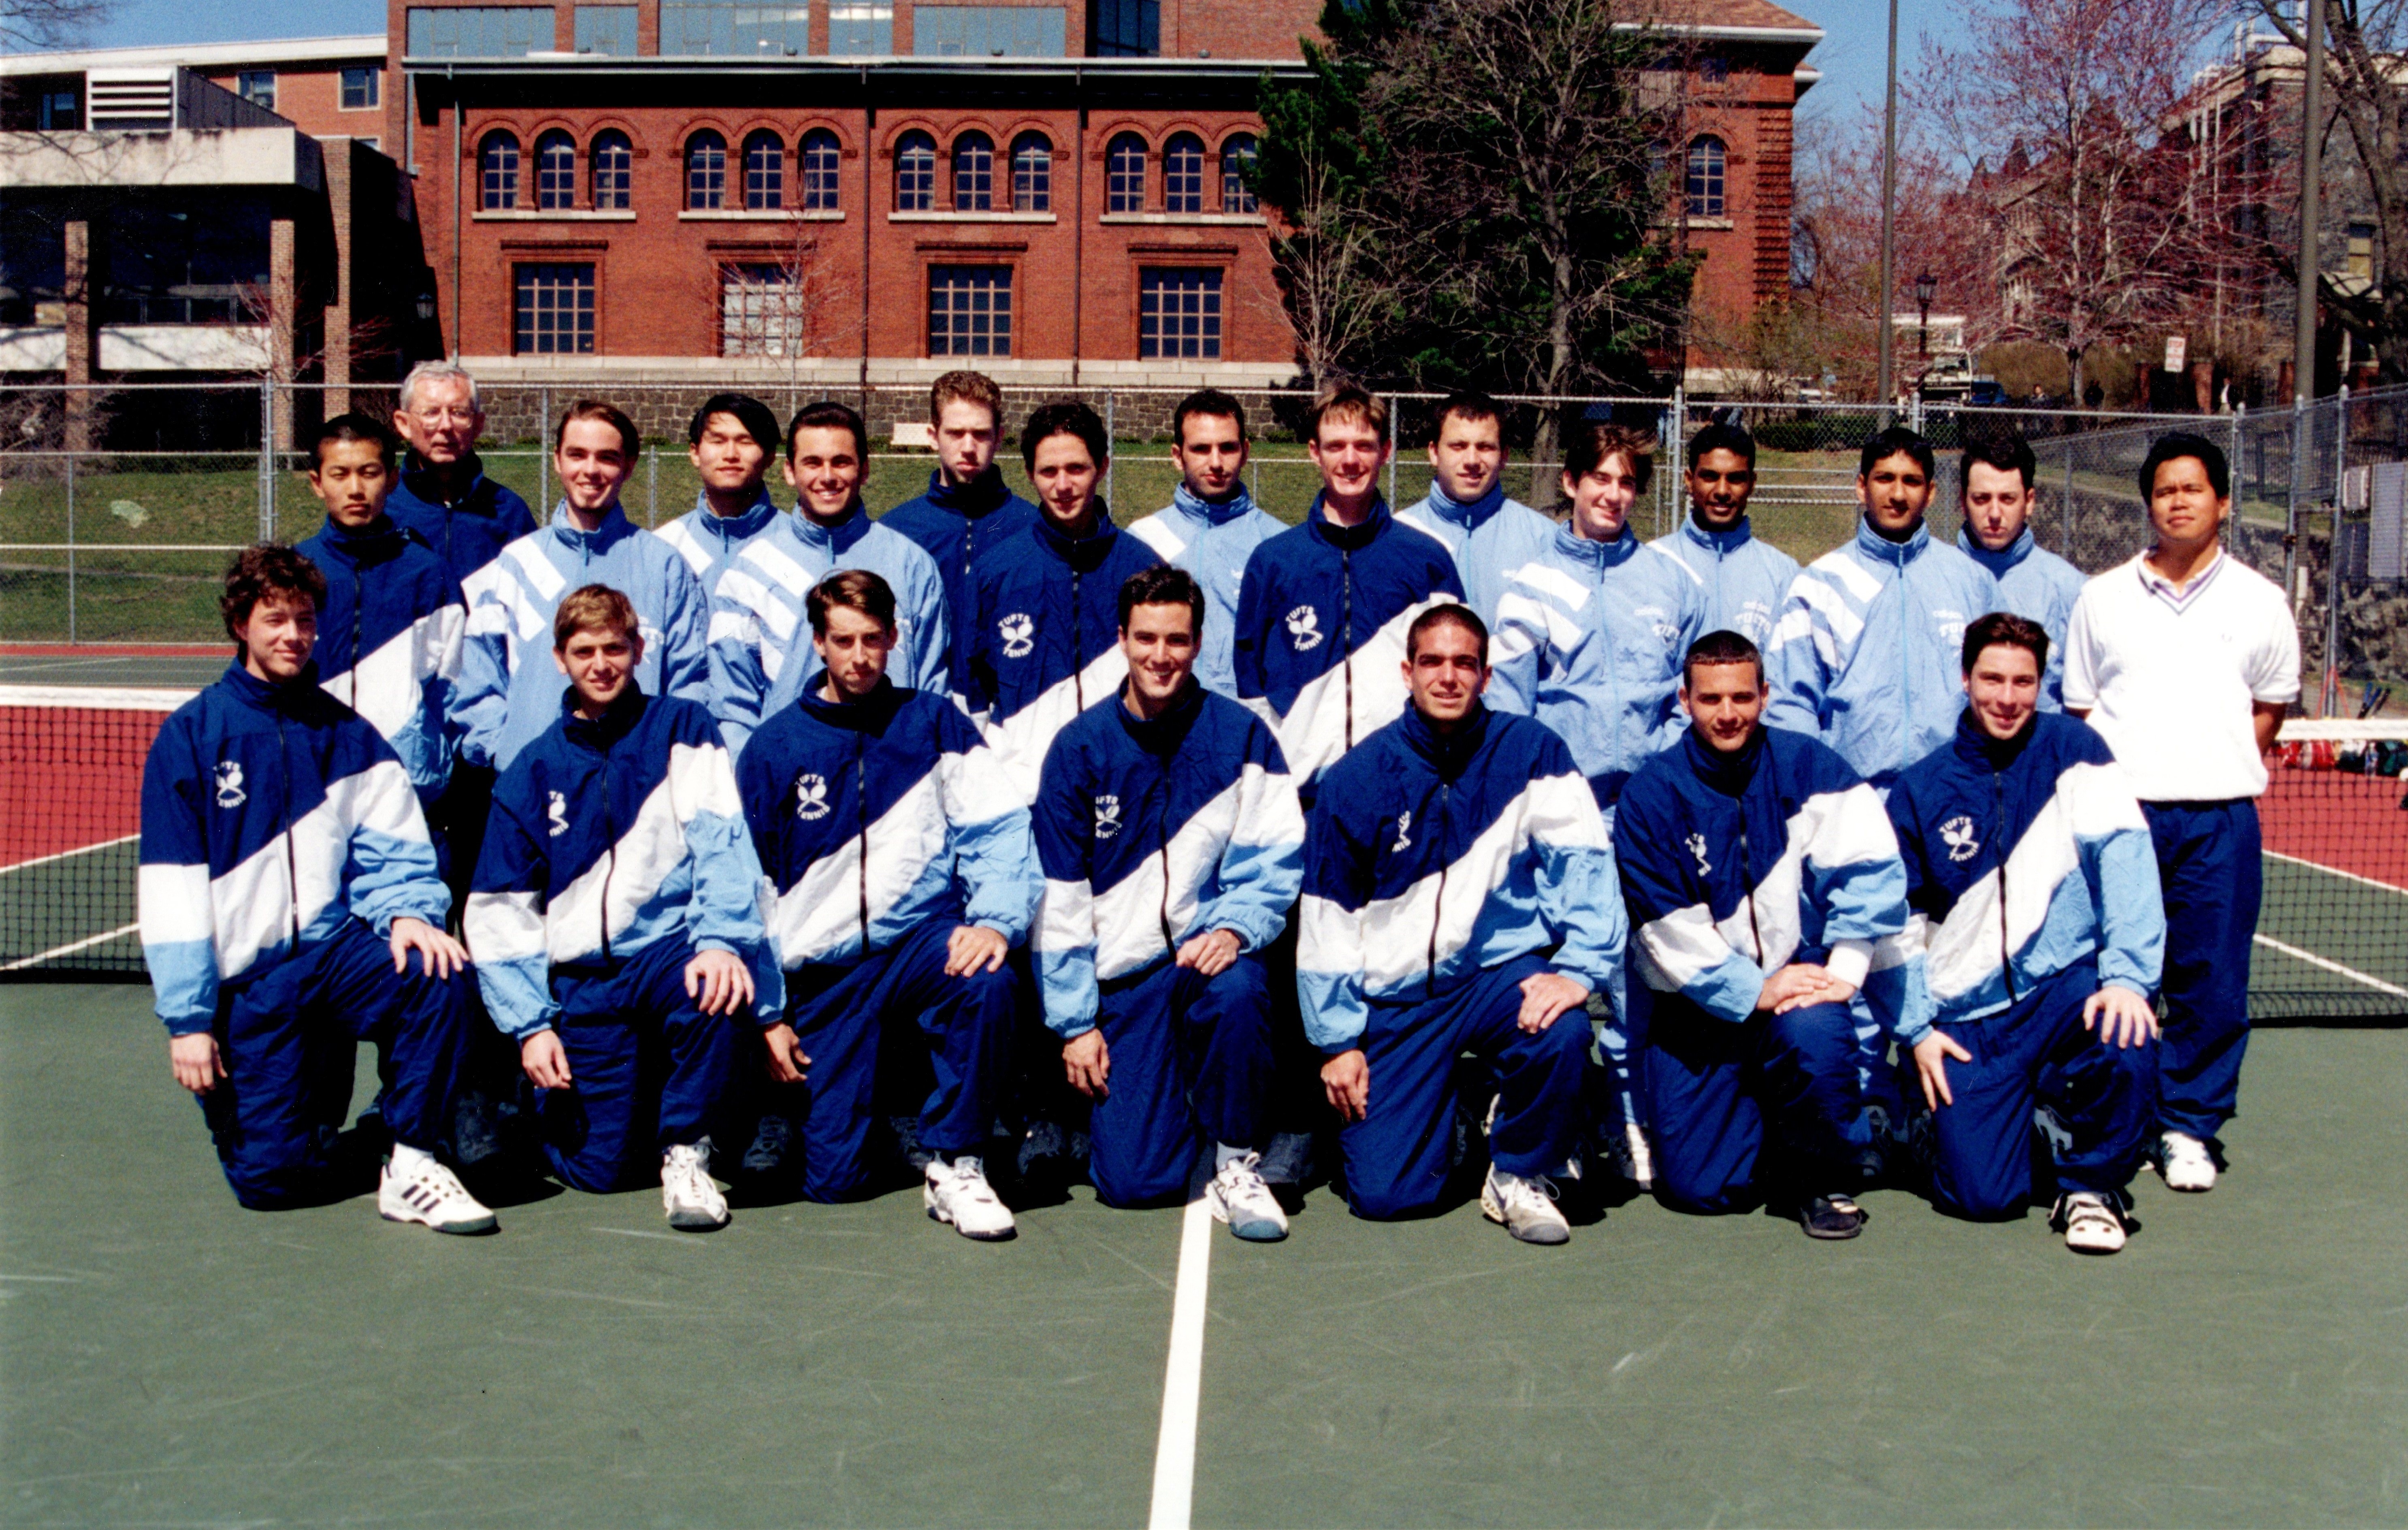 1997 Tufts University NCAA Tennis Team (I am in the center of the back row.)